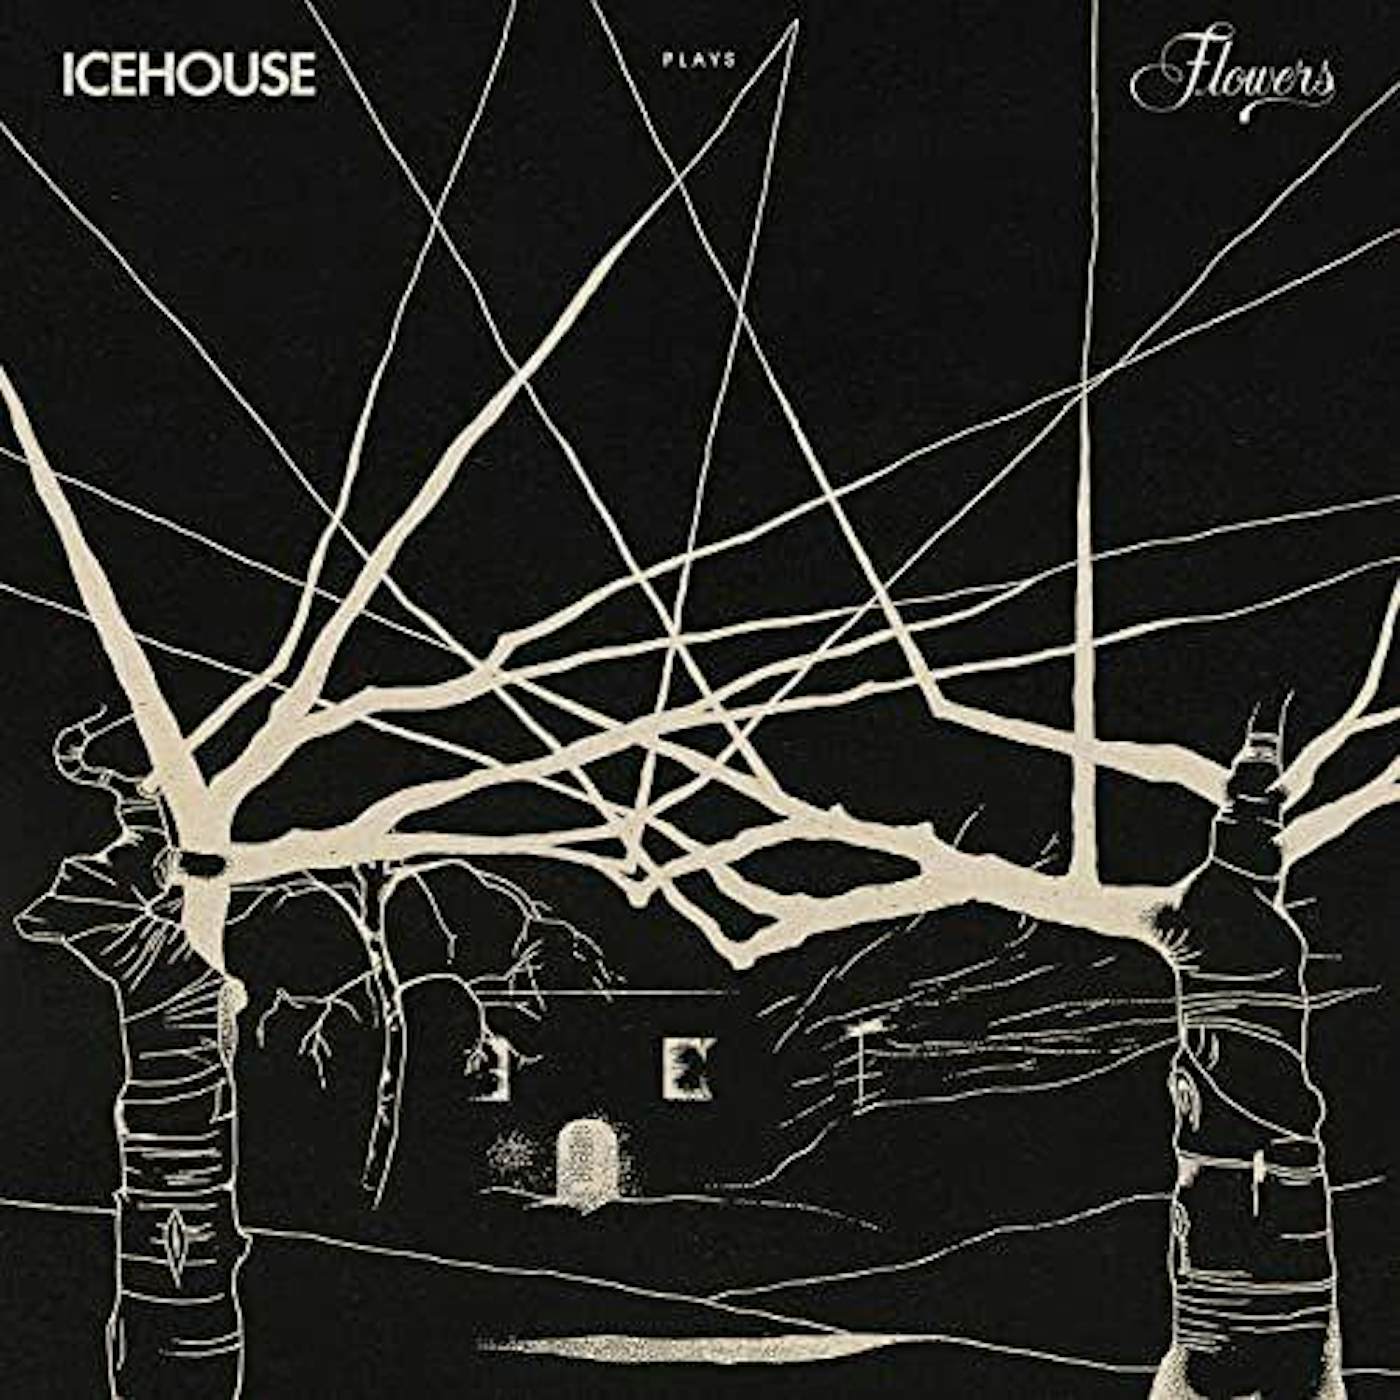 ICEHOUSE PLAYS FLOWERS: LIVE CD